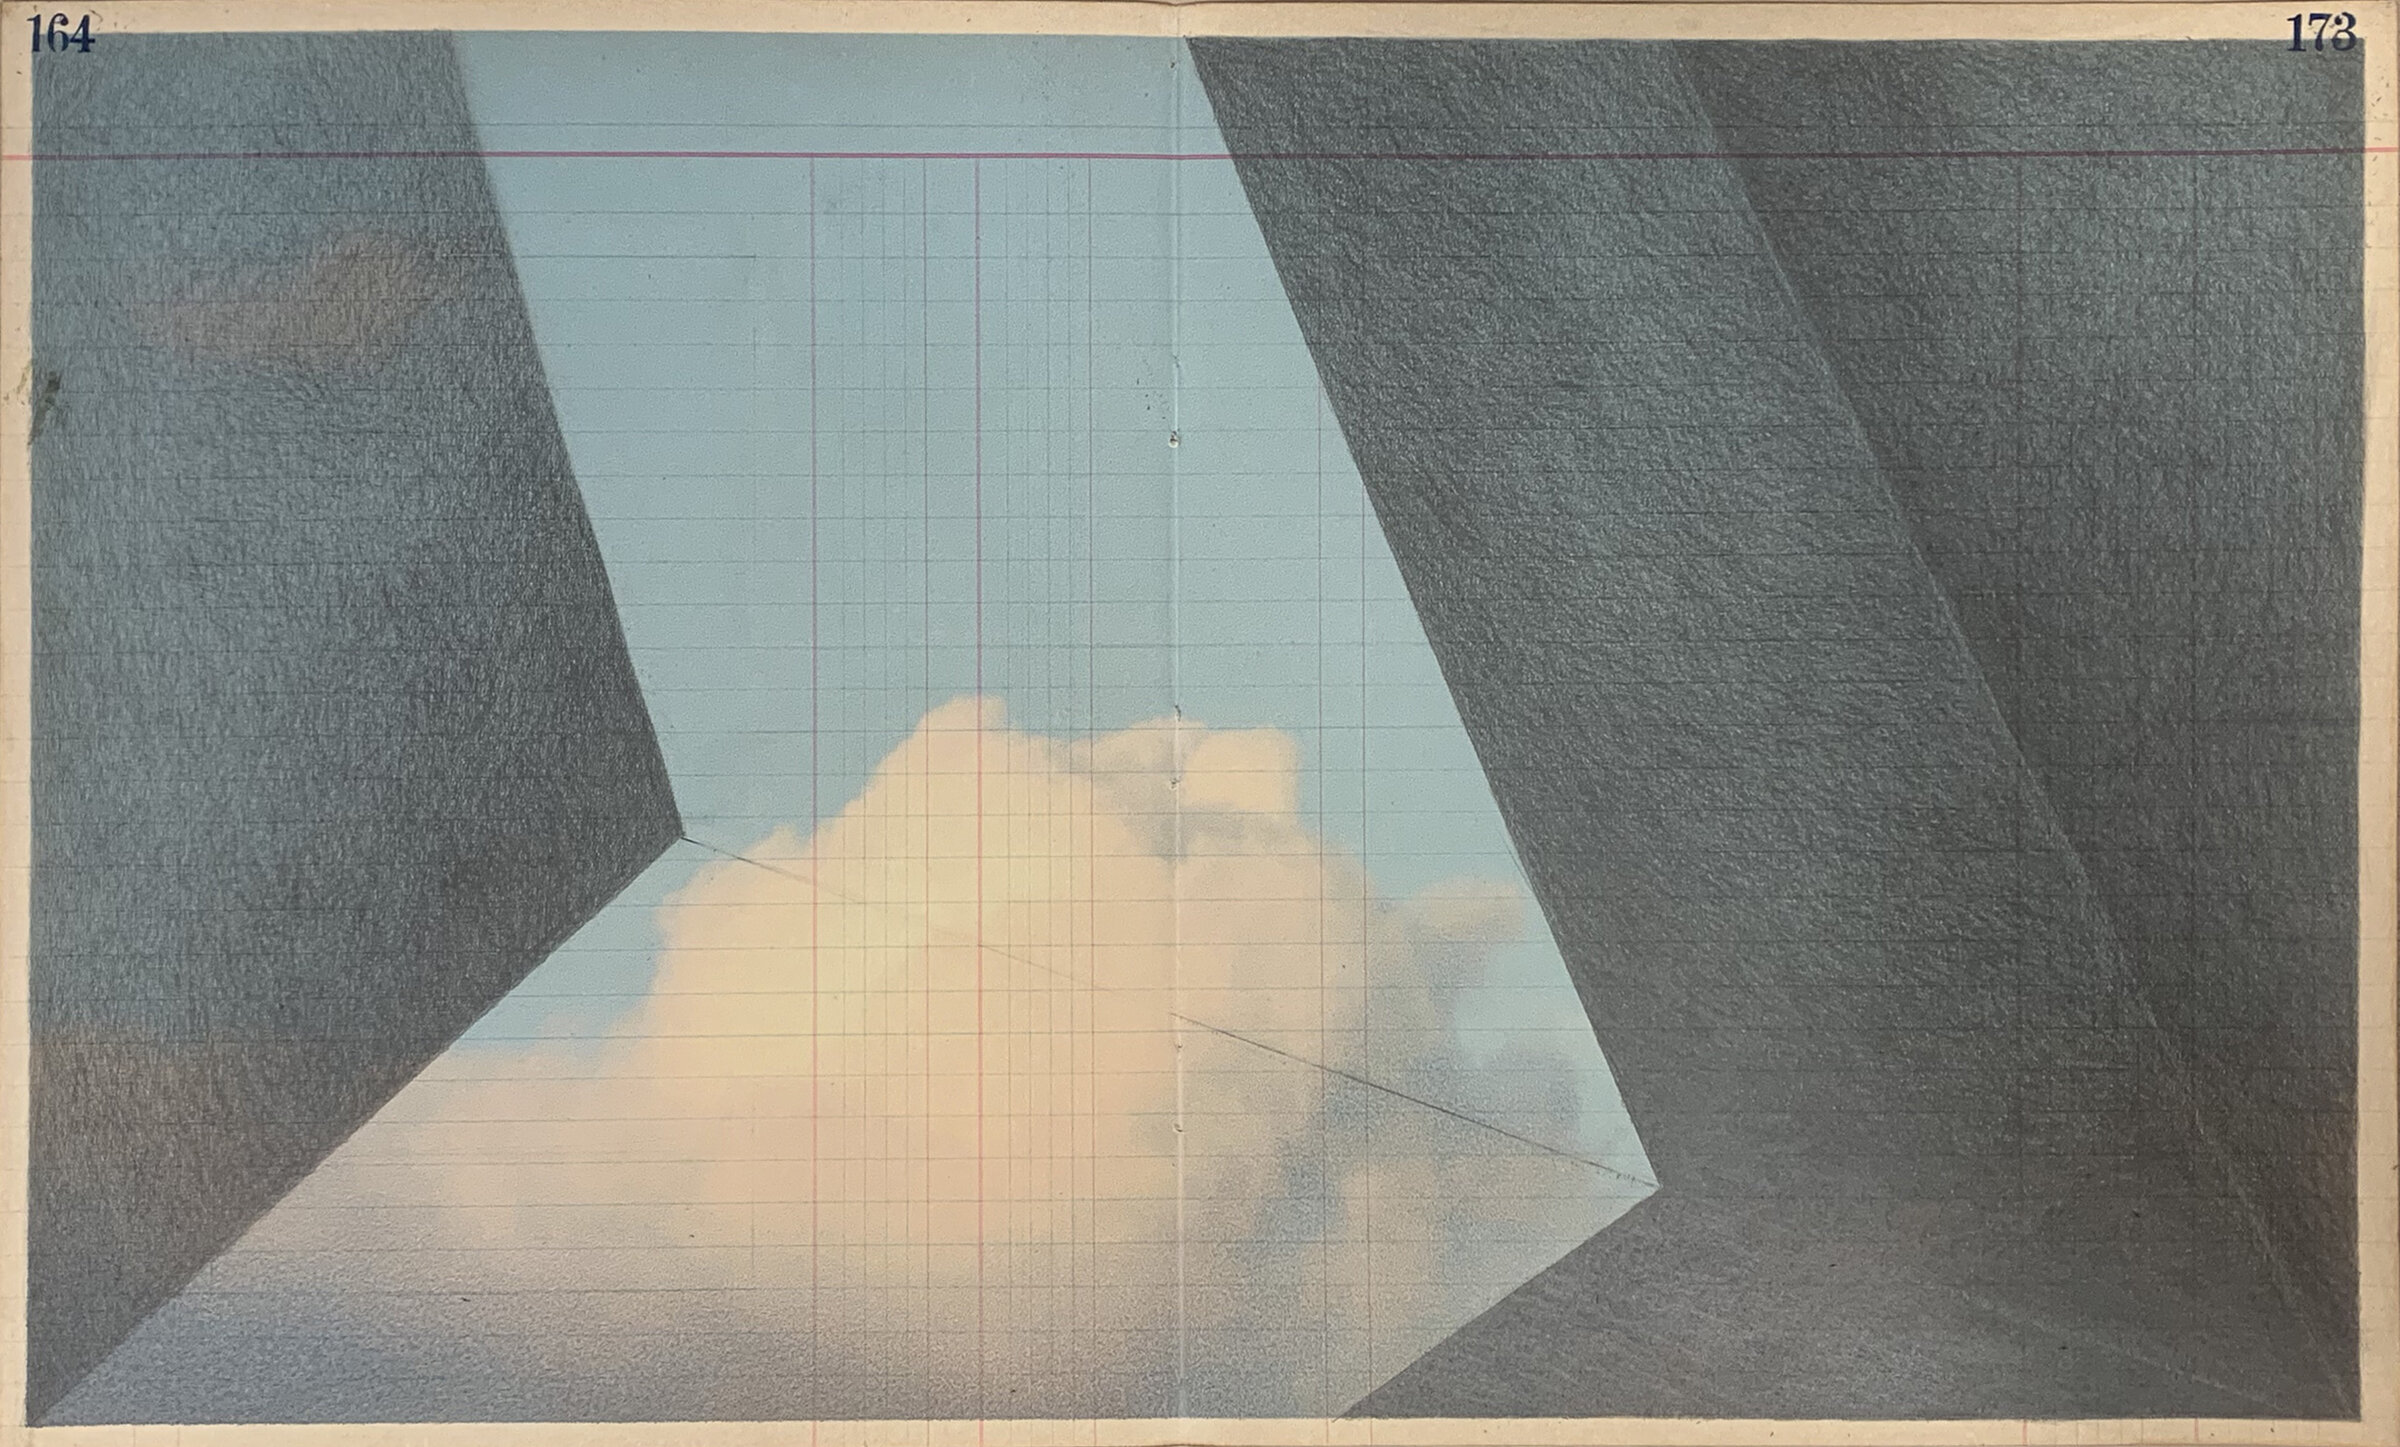  Jennifer Printz  ​The Thin and Delicate Line That Holds It All​ , 2020  Graphite and Epson Ultrachrome Inks on Antique Paper  12 x 18 1/2 inches  